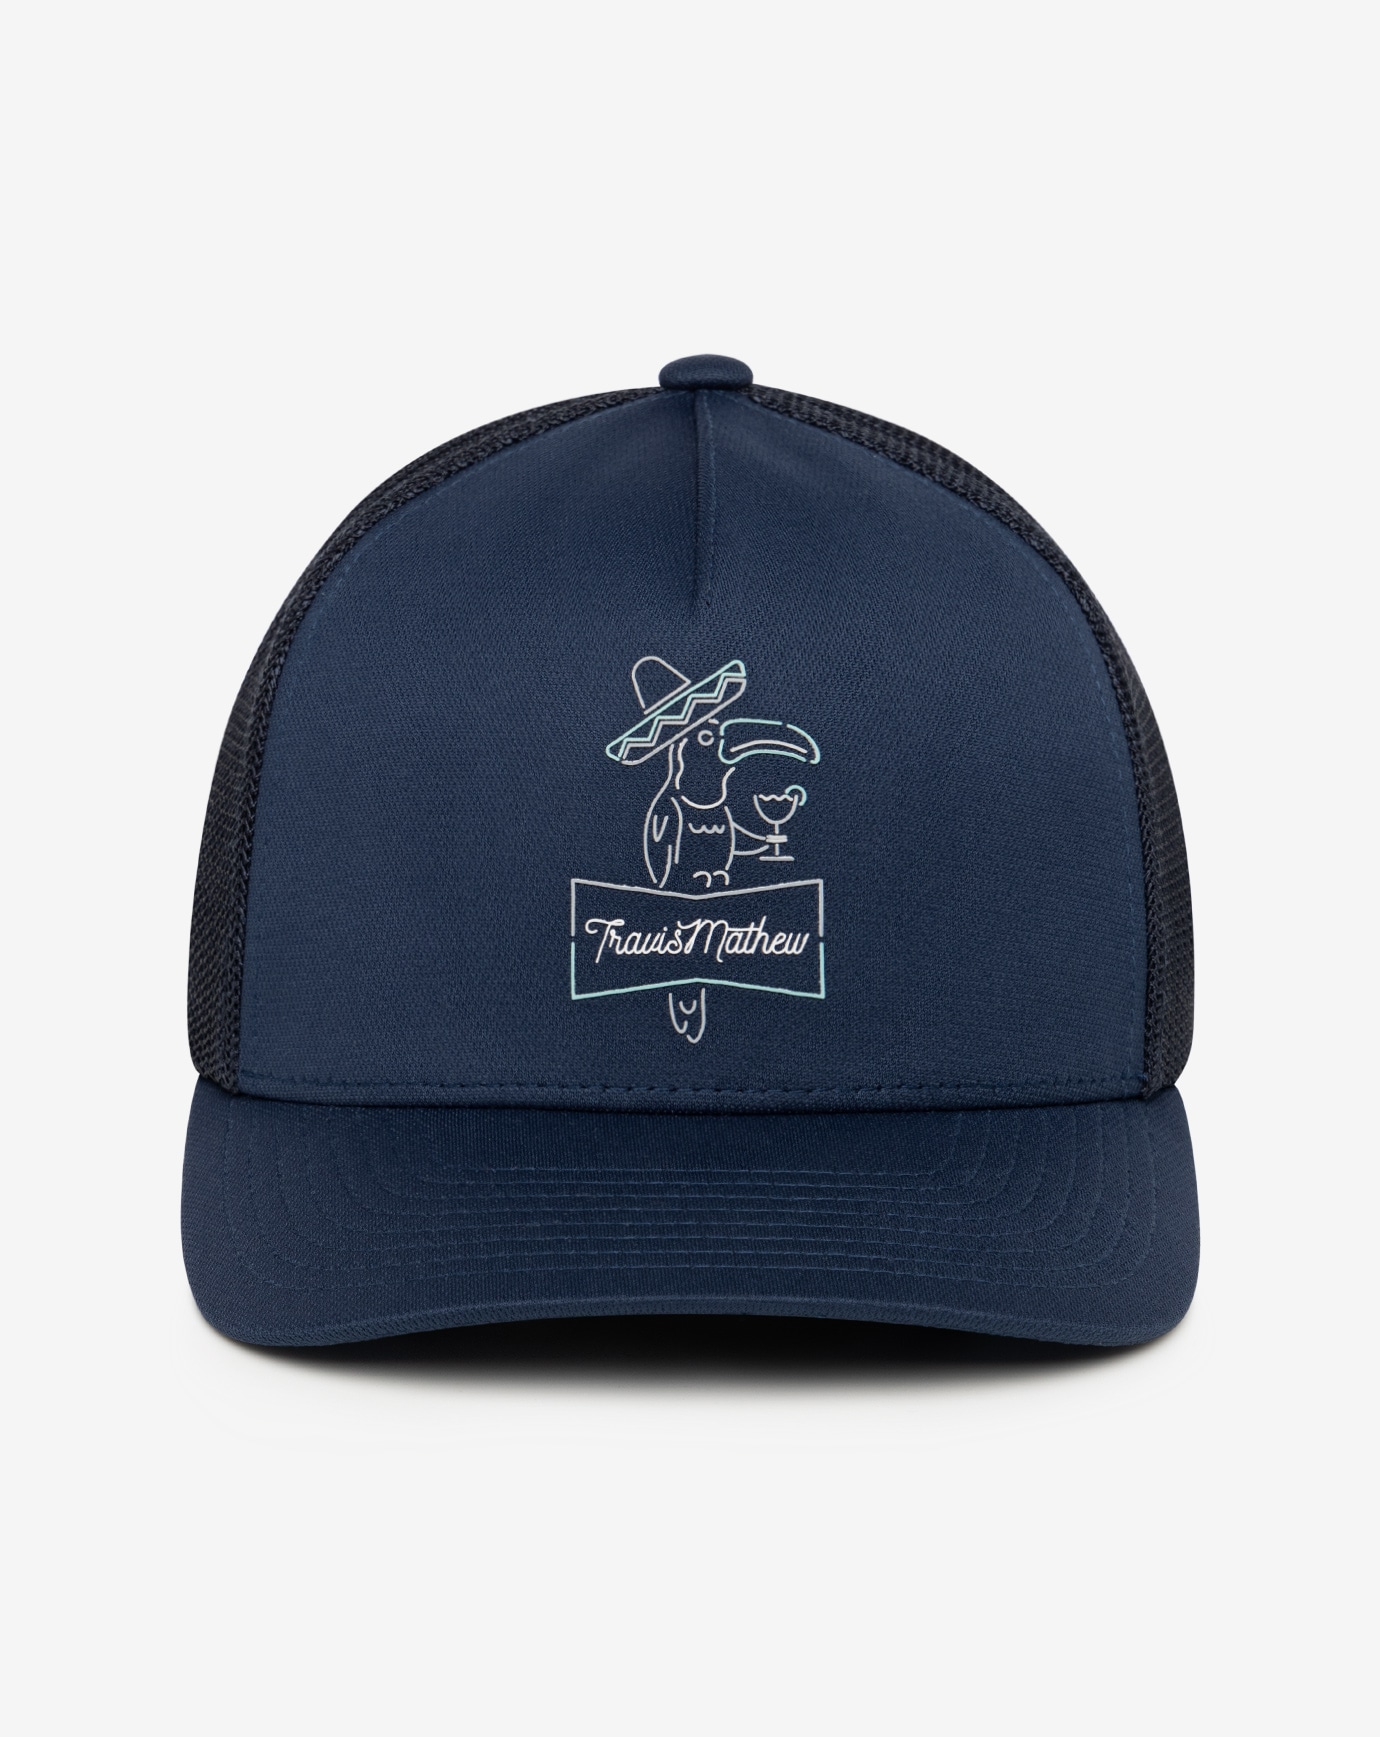 Related Product - MORELIA SNAPBACK HAT